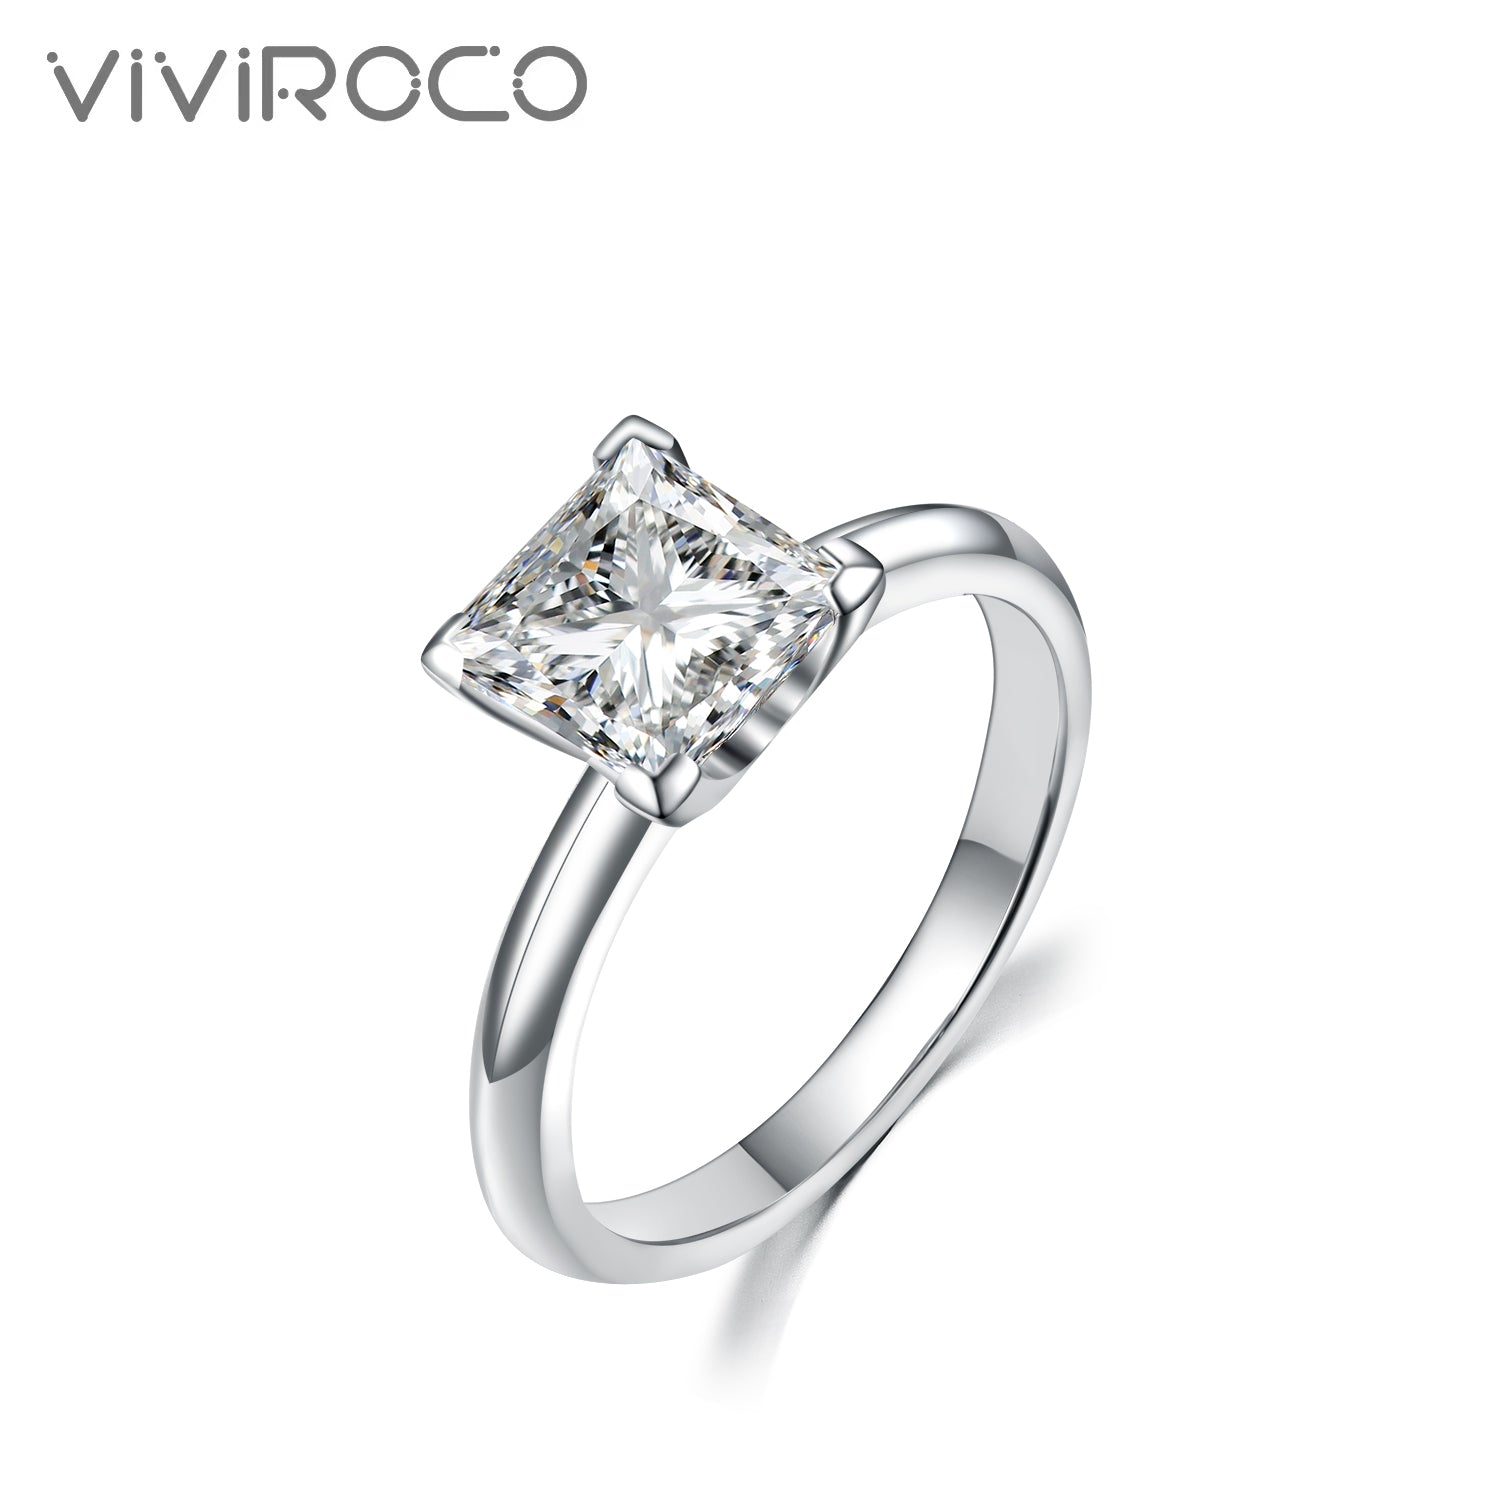 【02LIVE # link 50 - BUY 1 GET 1 free ring】RM1038 S925 Silver Moissanite Ring 1.2 Carat